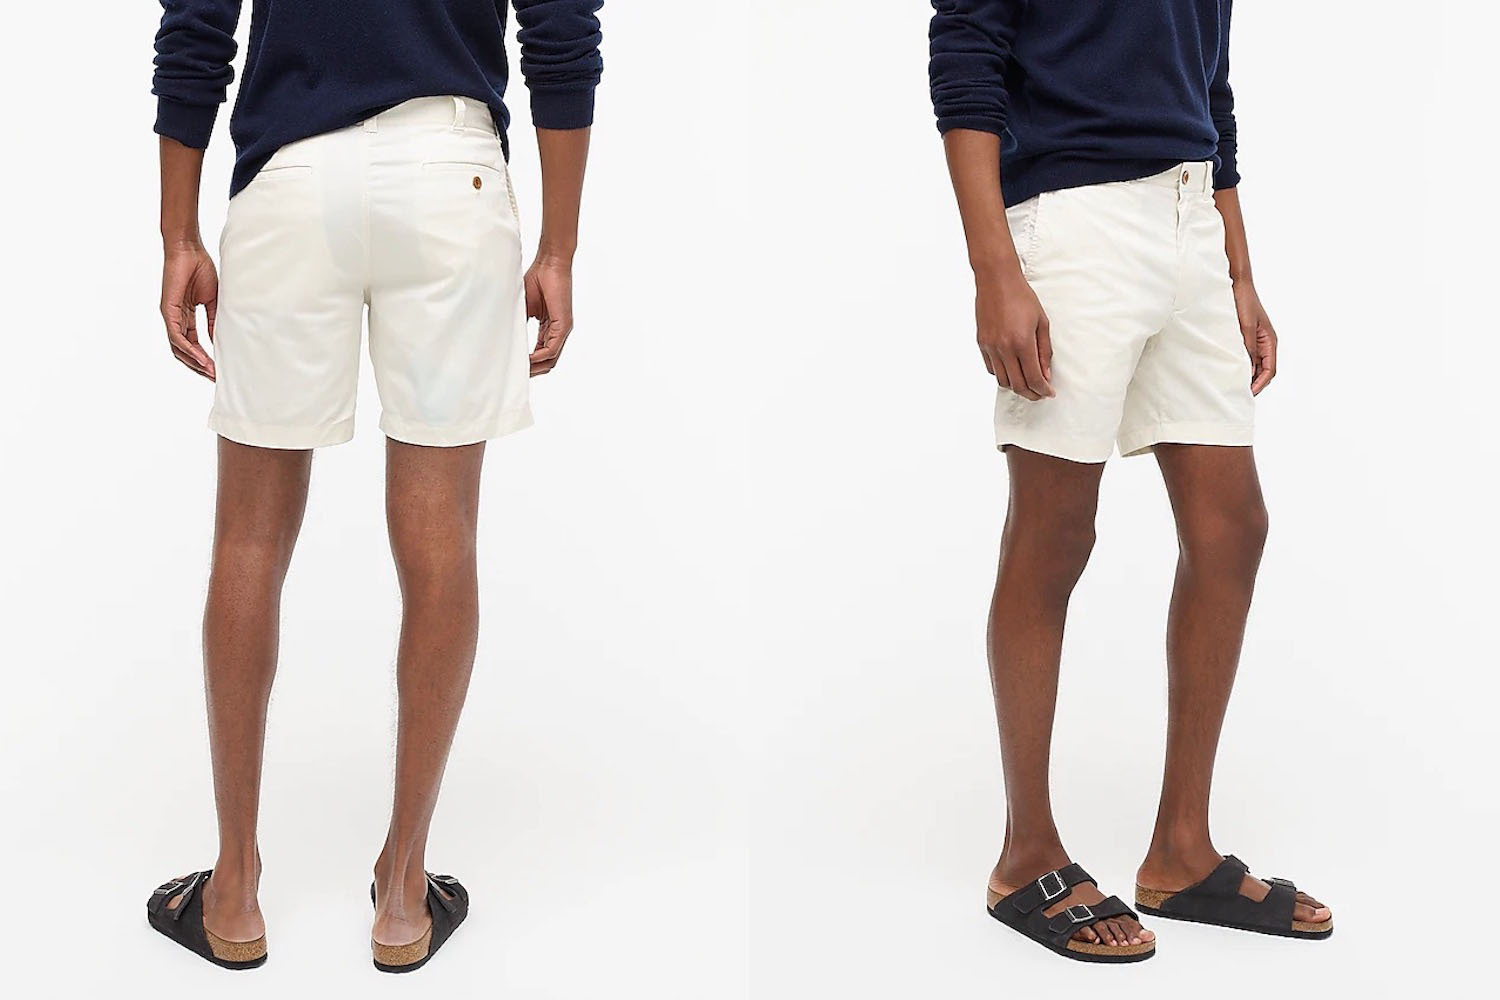 two front and back model shots of the J.Crew chino shorts on a white background